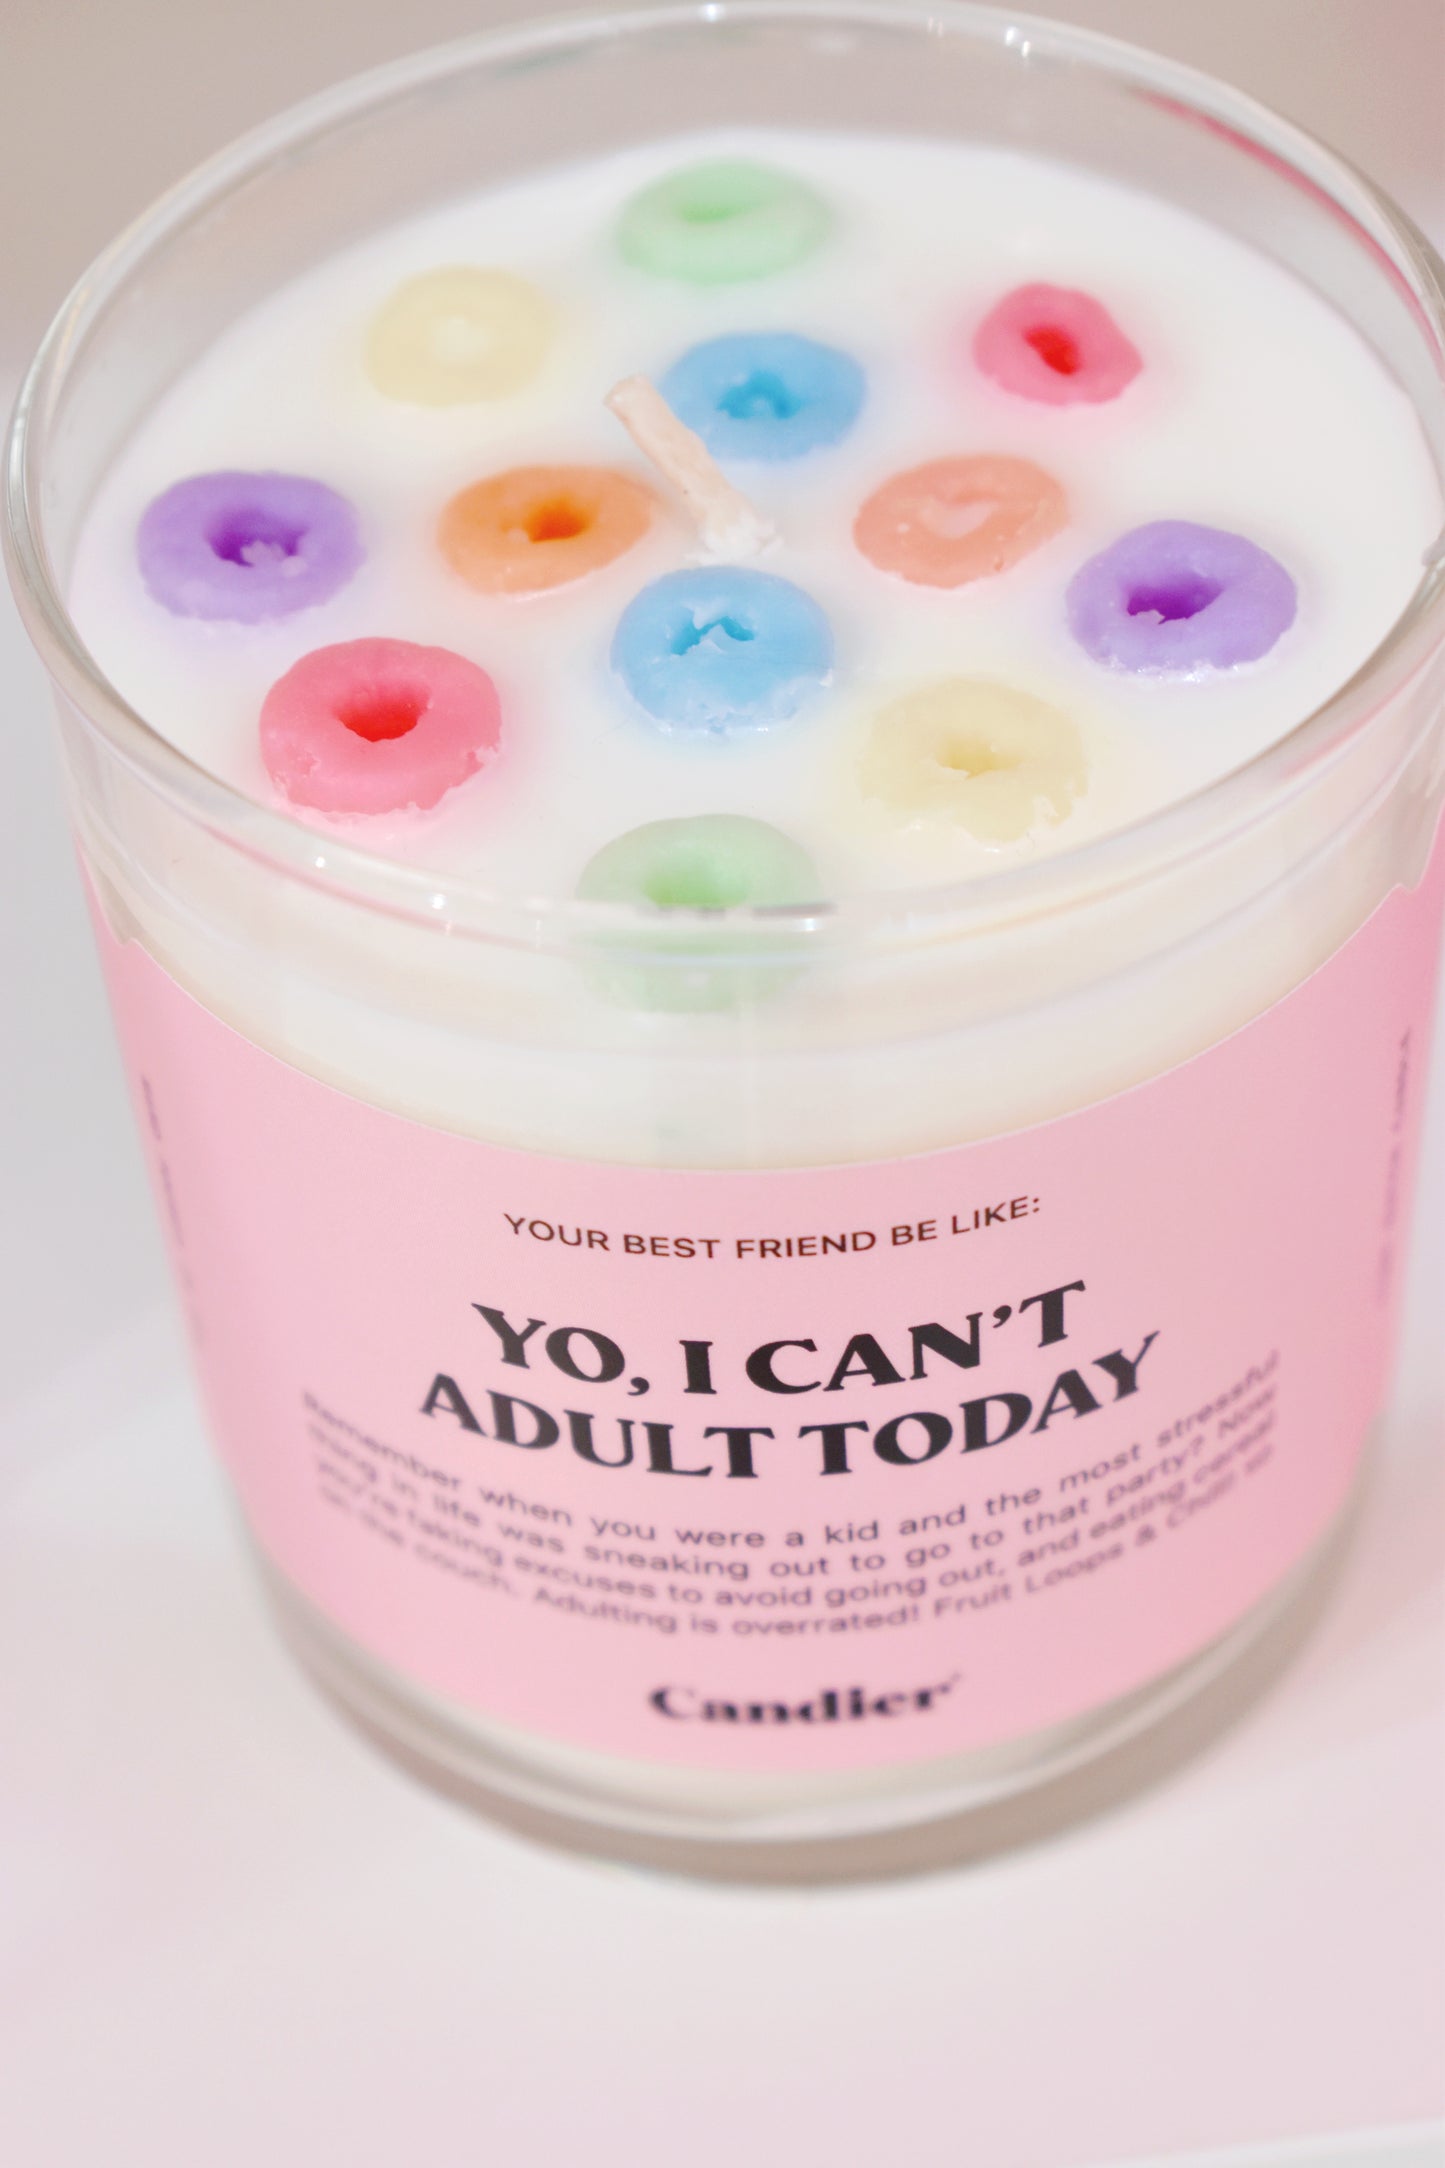 Candier Can't Adult Today Cereal Candle